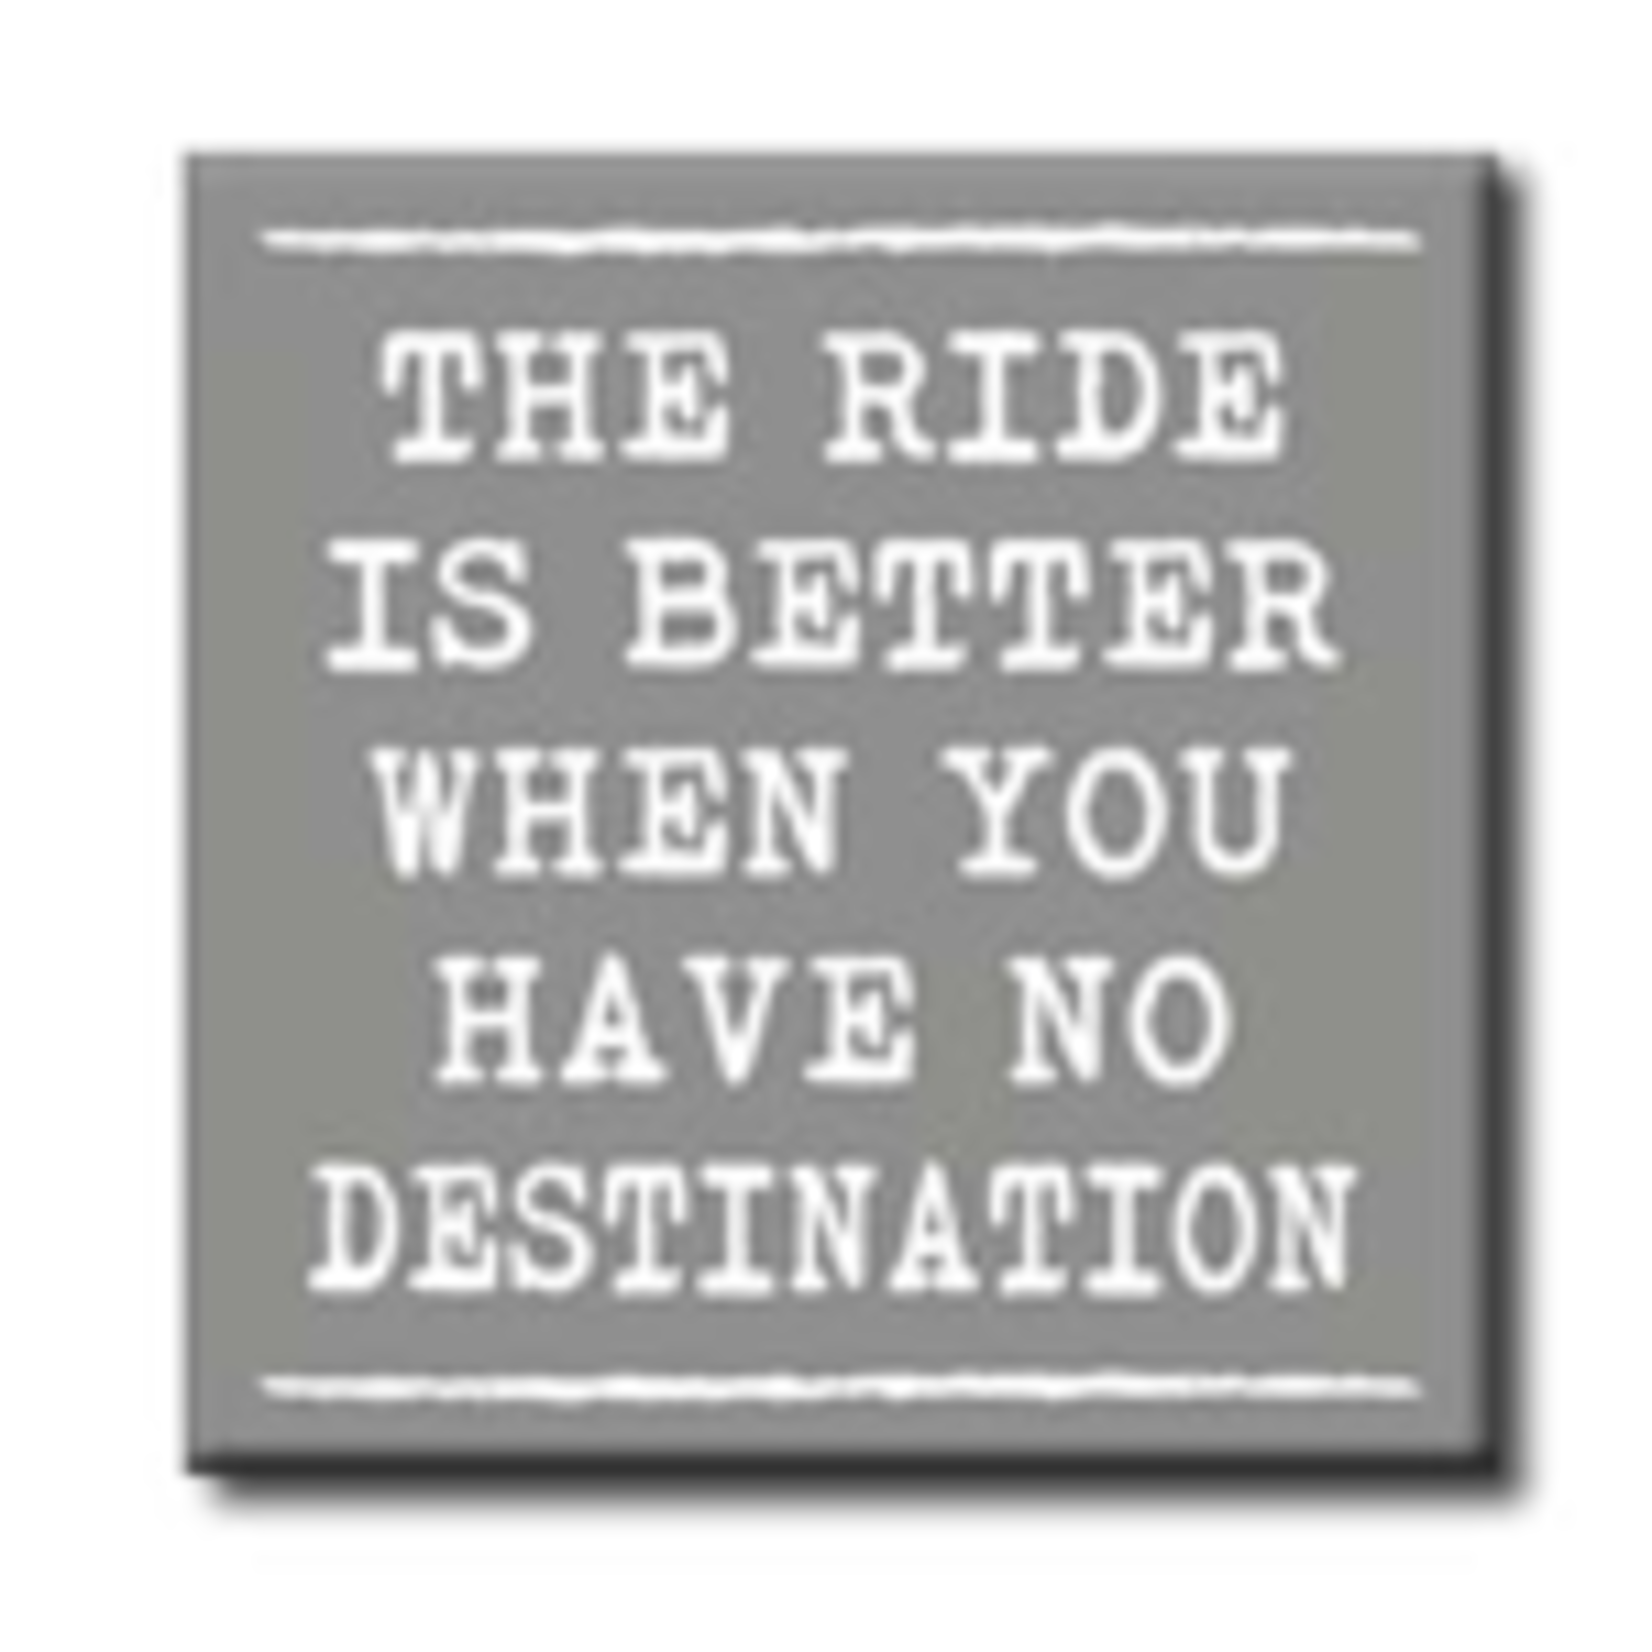 The Ride Is Better Destination 4x4